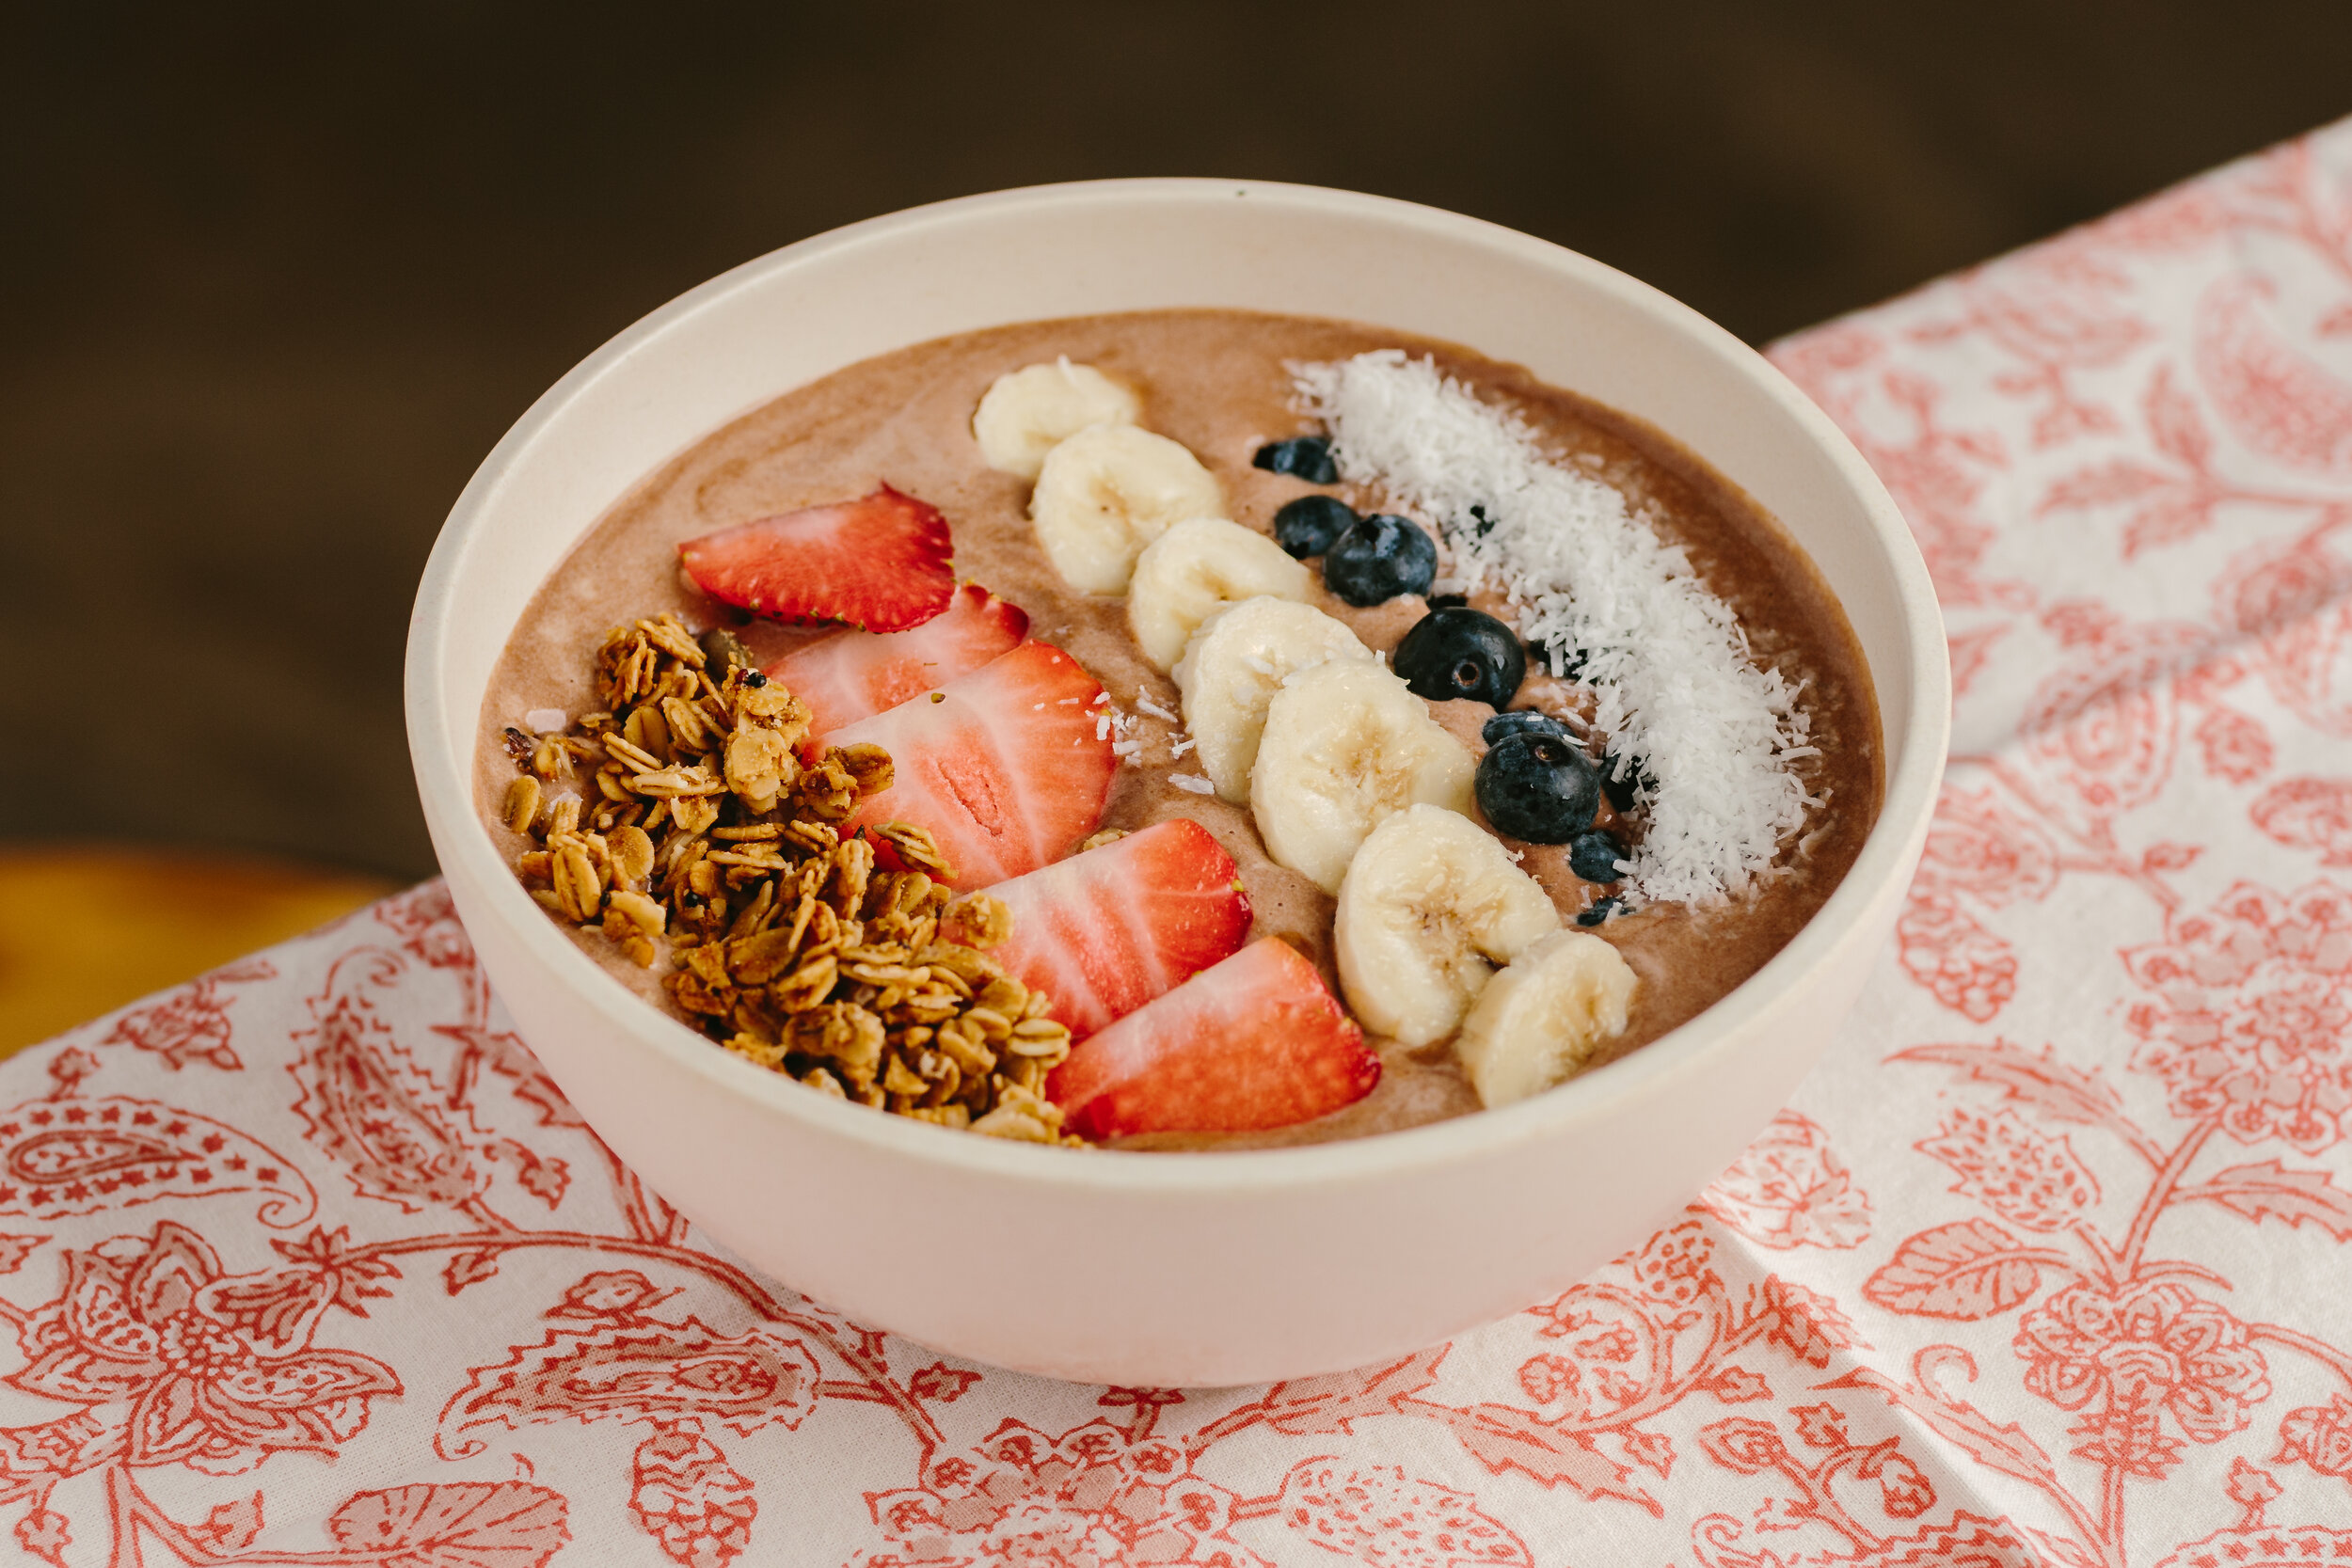 3. Chocolate Protein Smoothie BowlChocolate smoothie with locally sourced granola, banana, strawberries, coconut flakes, and a chocolate protein powder.